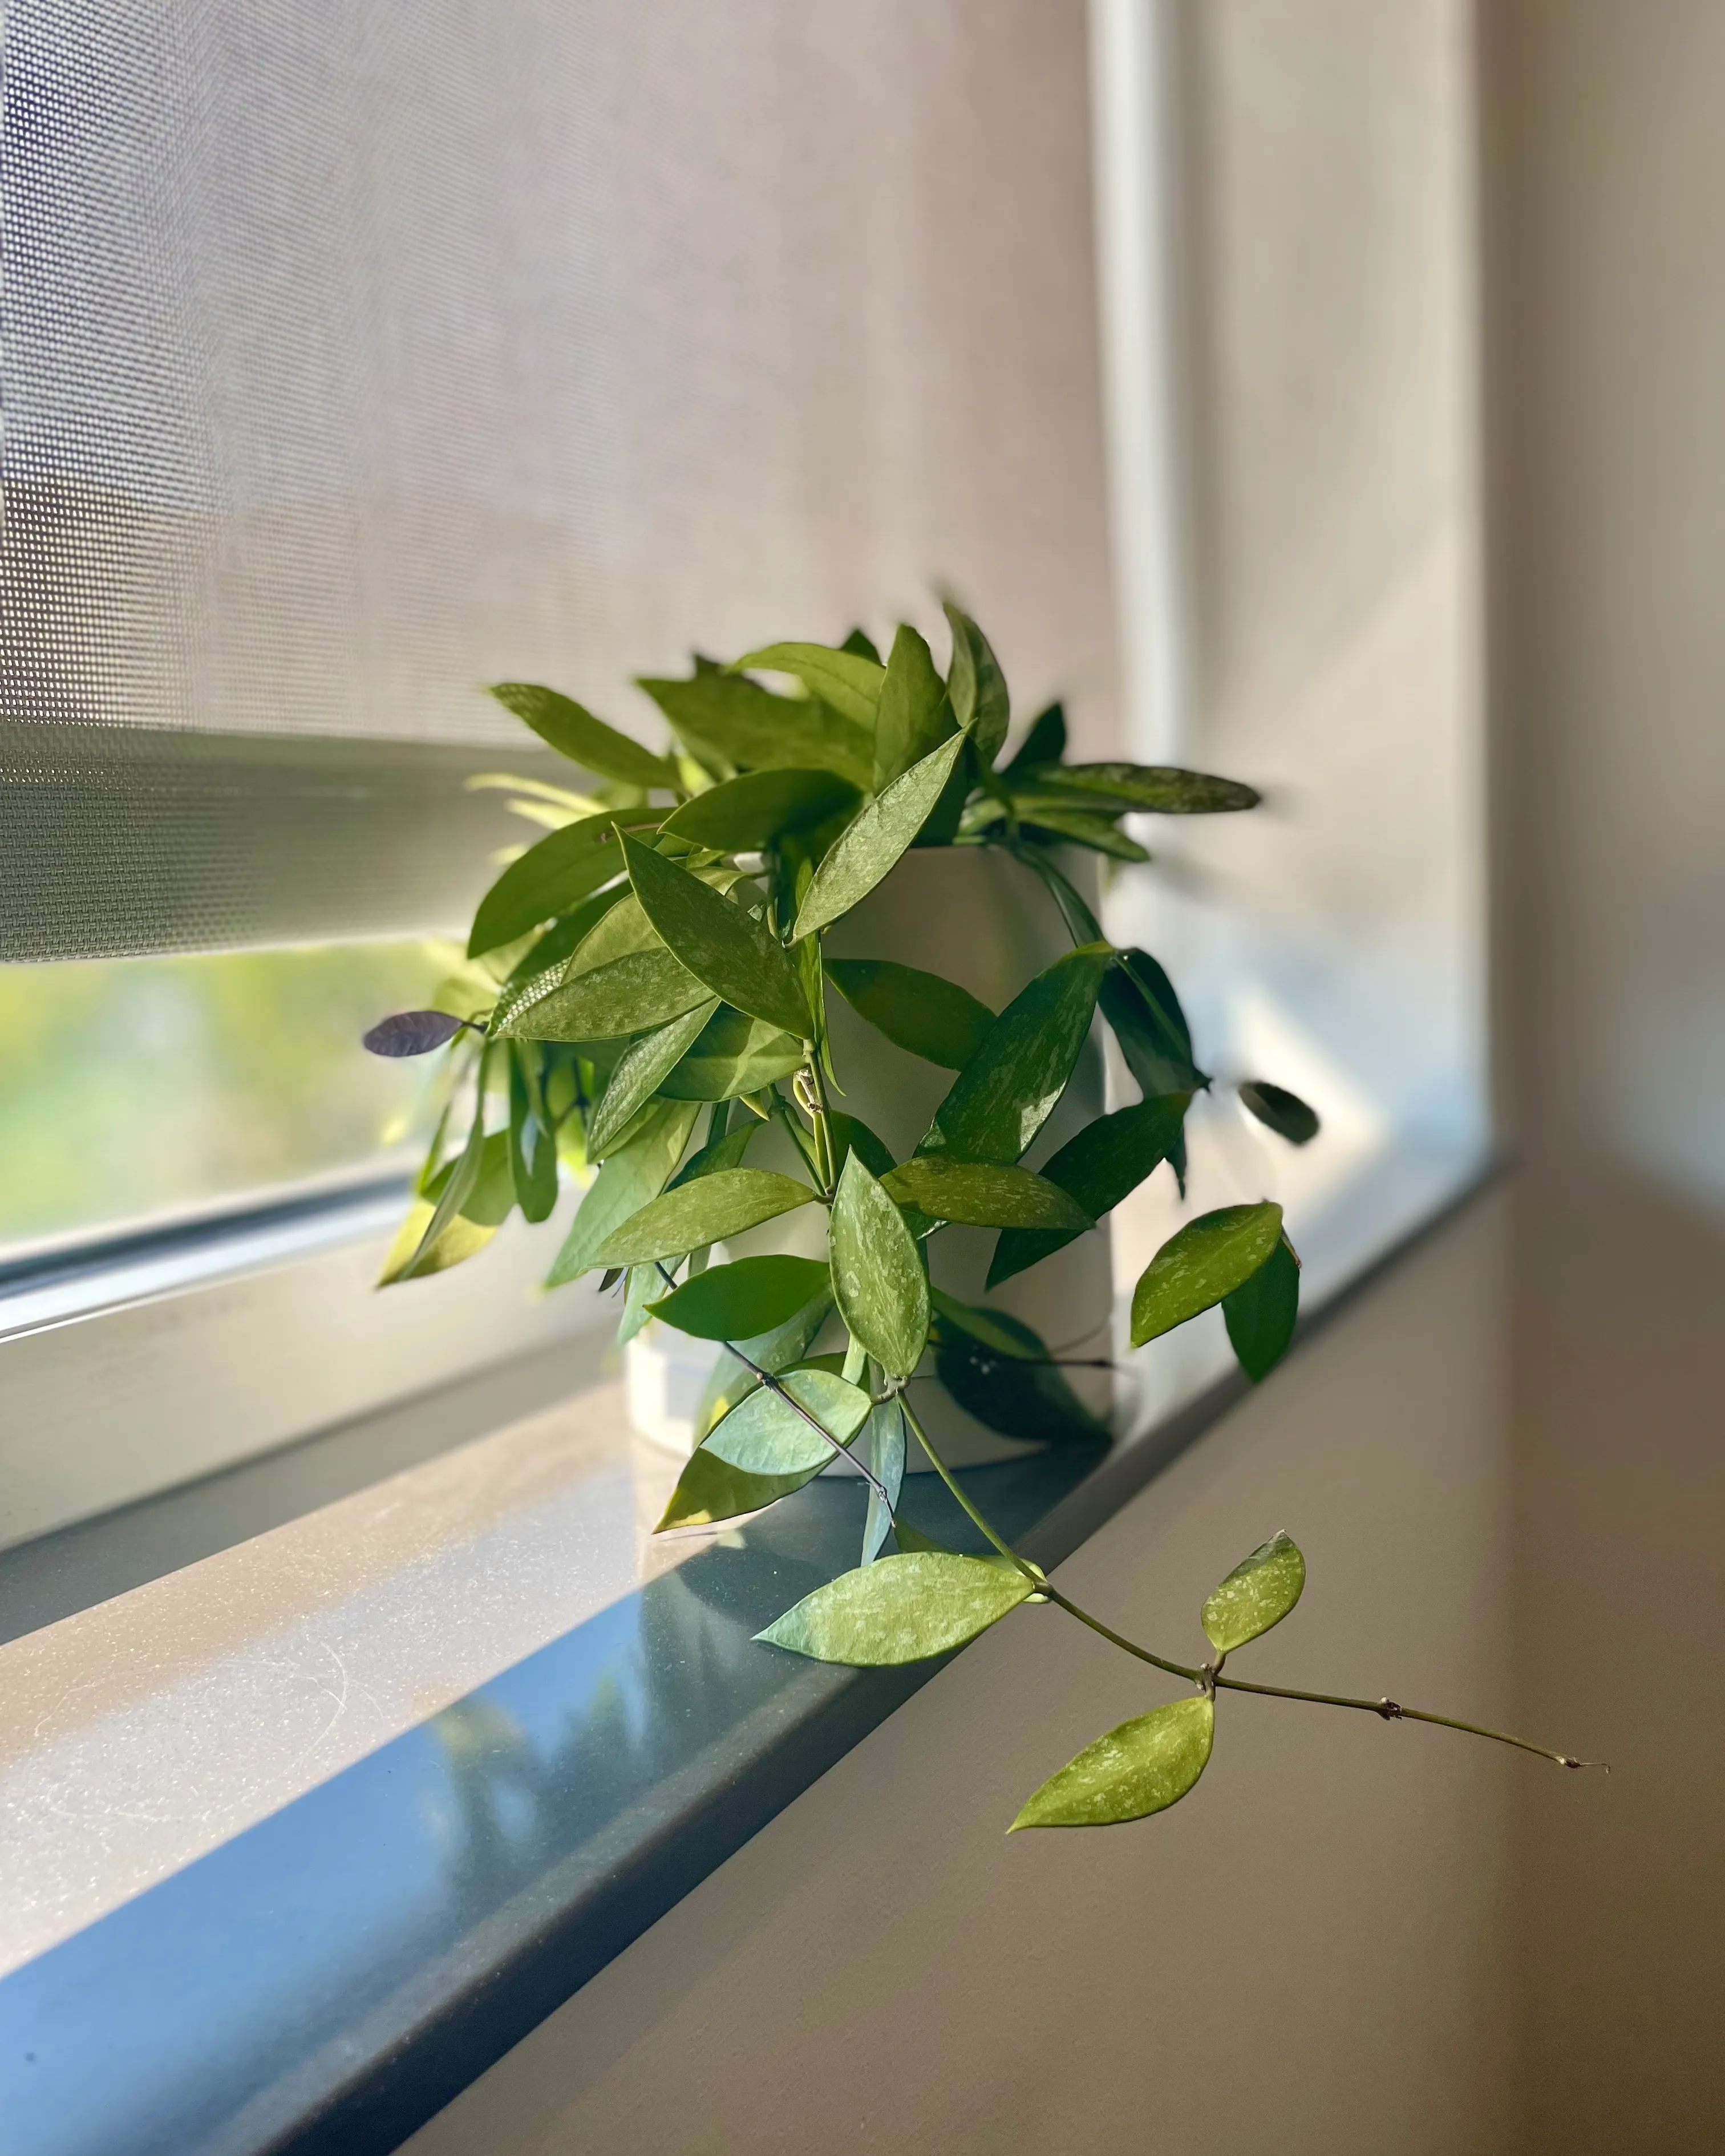 {A plant on a windowsill in a business